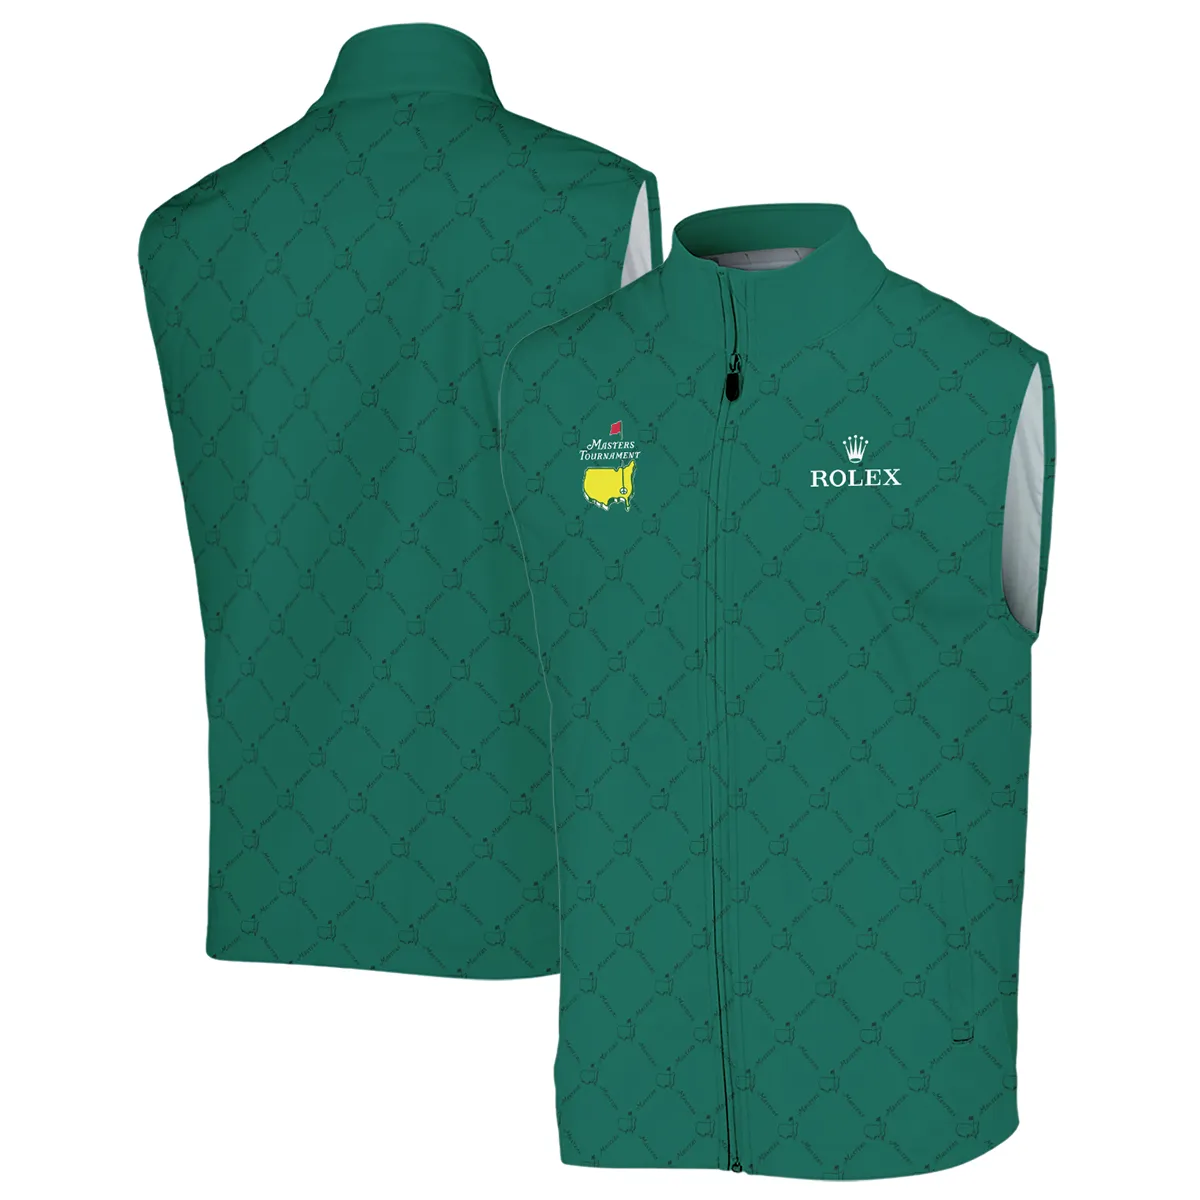 Golf Sport Pattern Color Green Mix Black Masters Tournament Rolex Vneck Polo Shirt Style Classic